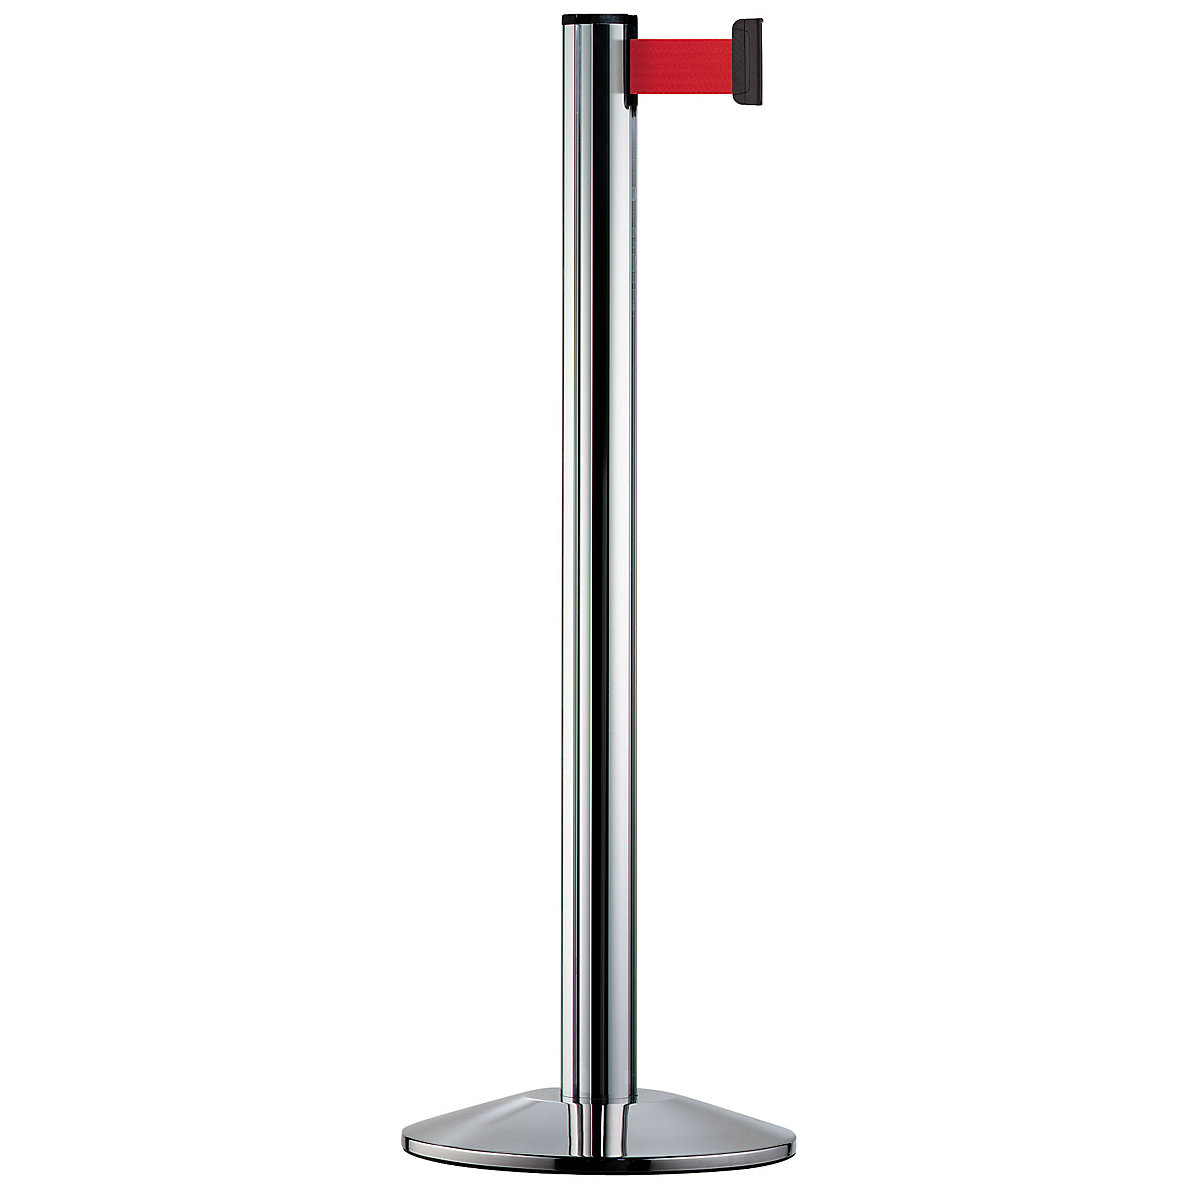 Belt post made of aluminium, post polished chrome, extends 2300 mm, belt colour red-4